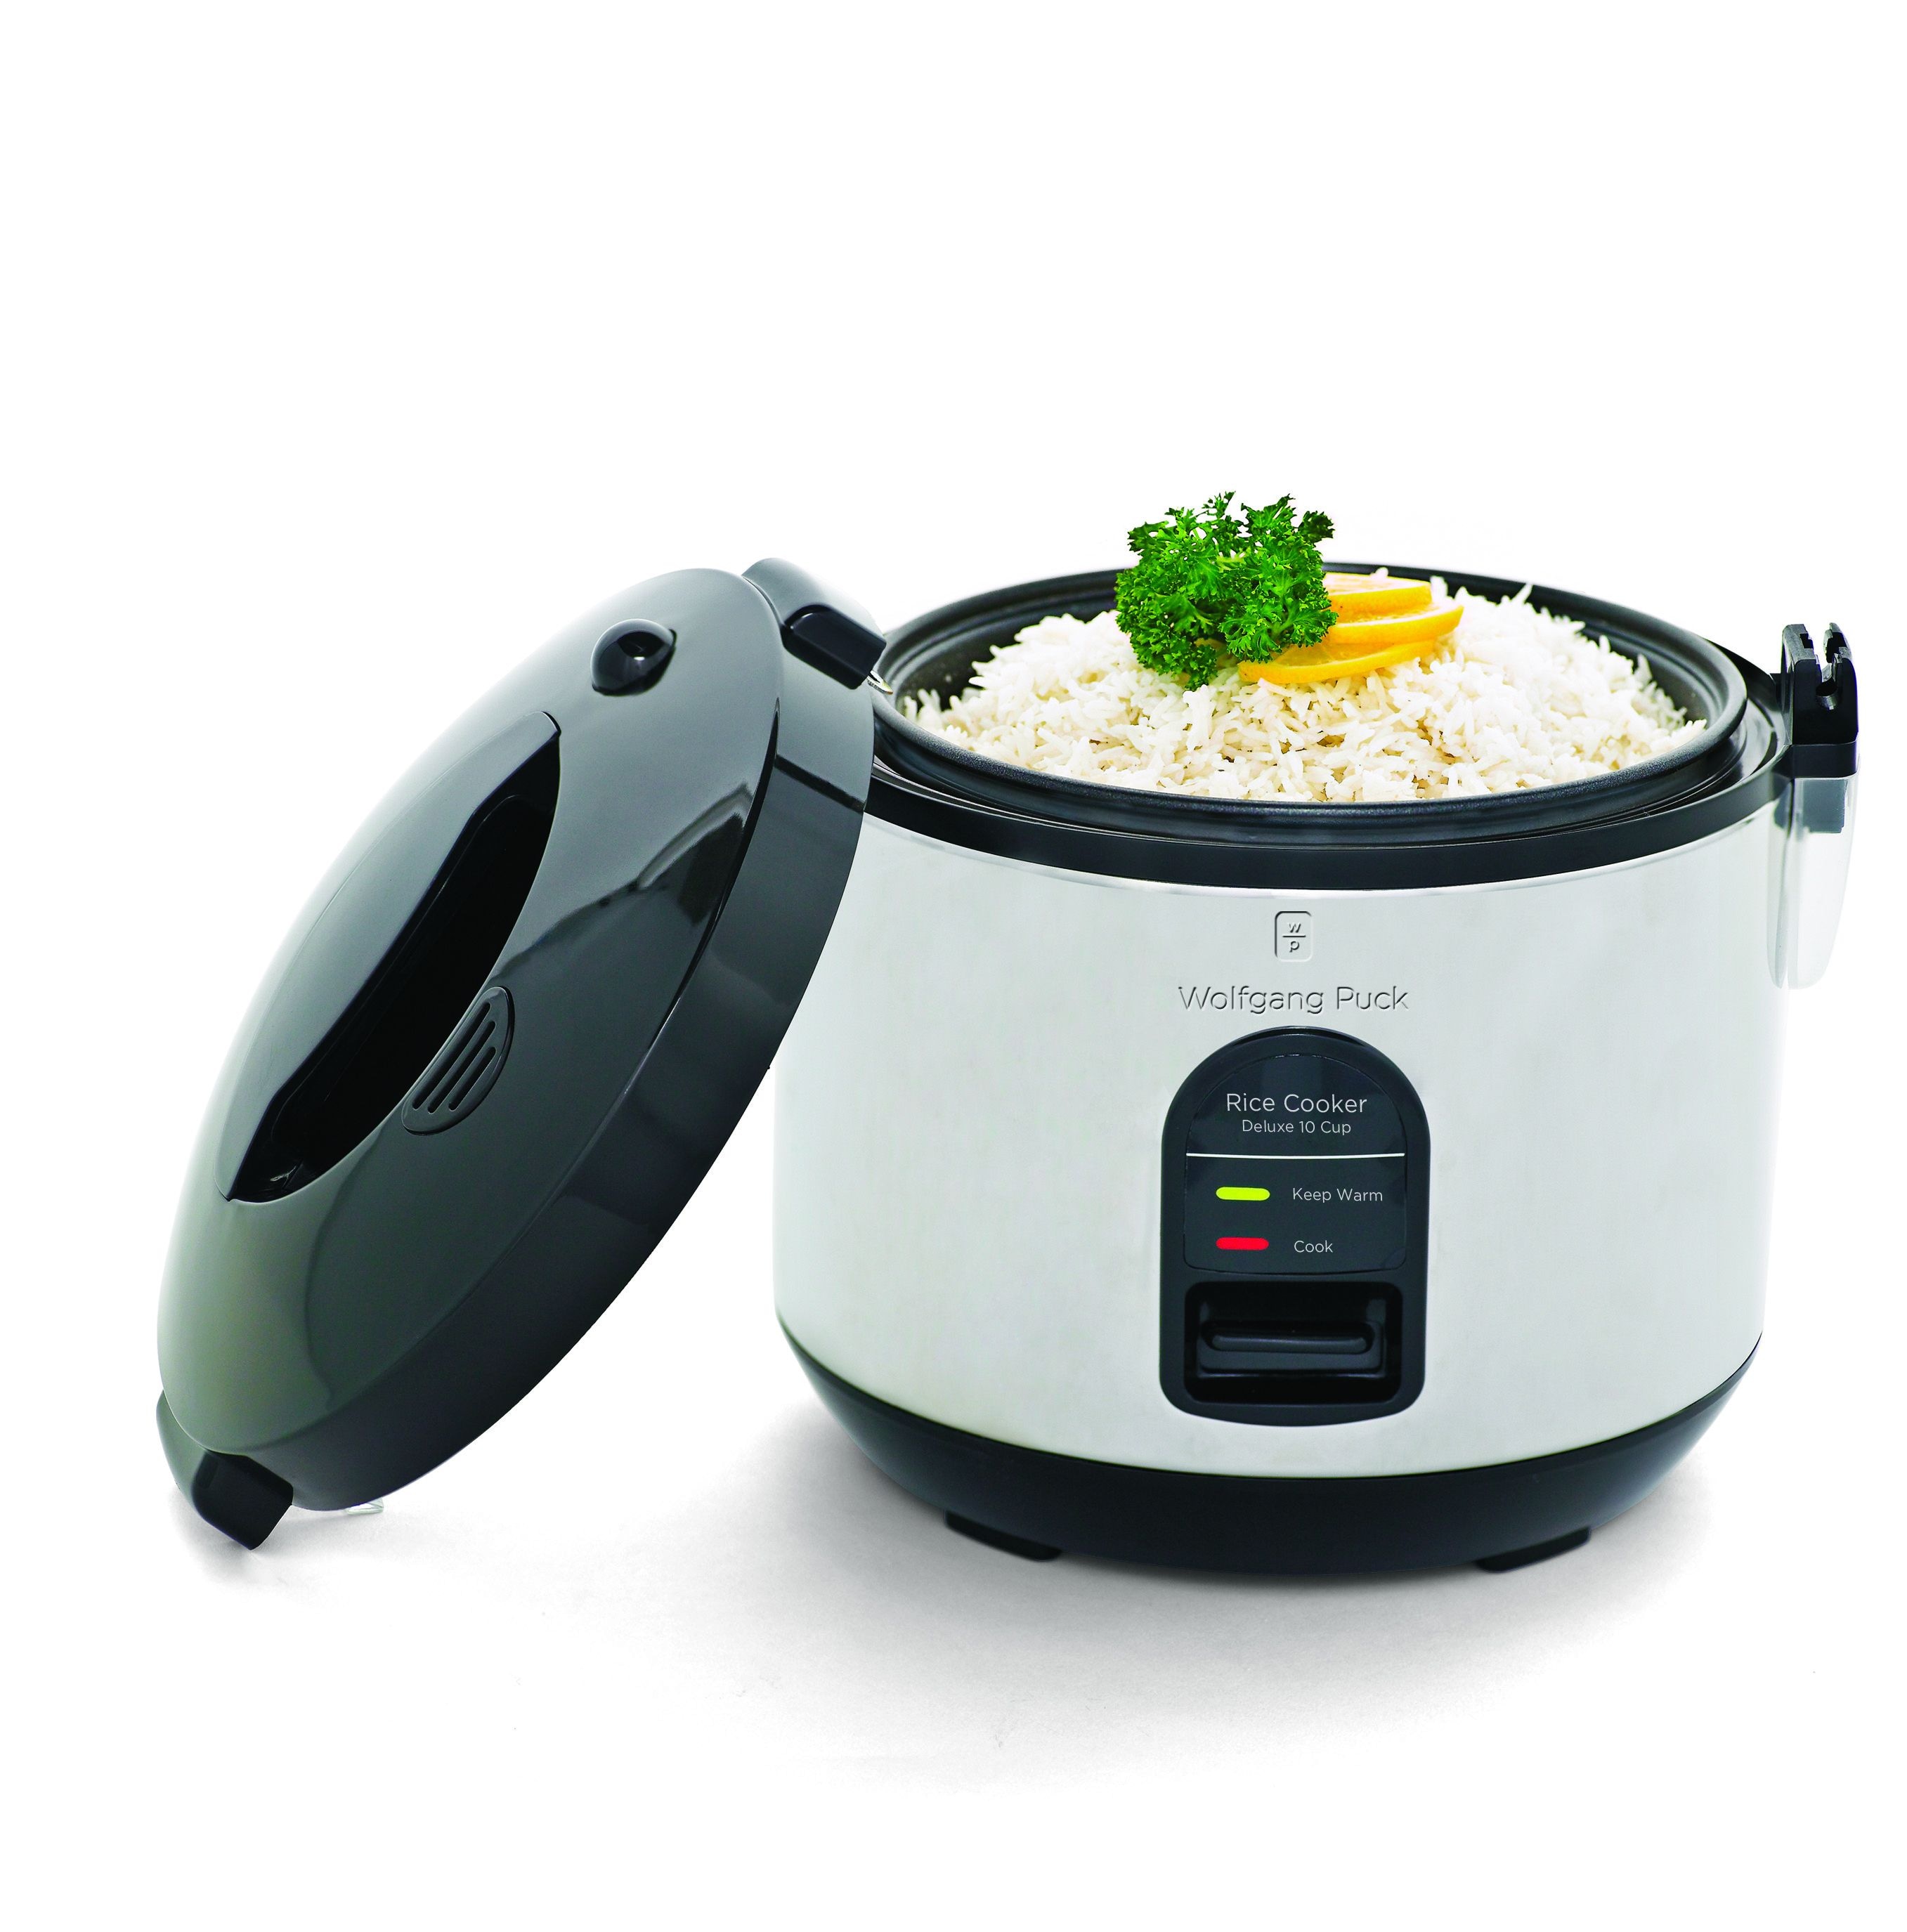 Wolfgang Puck Stainless Steel 1.5-Cup Rice Cooker with Recipes